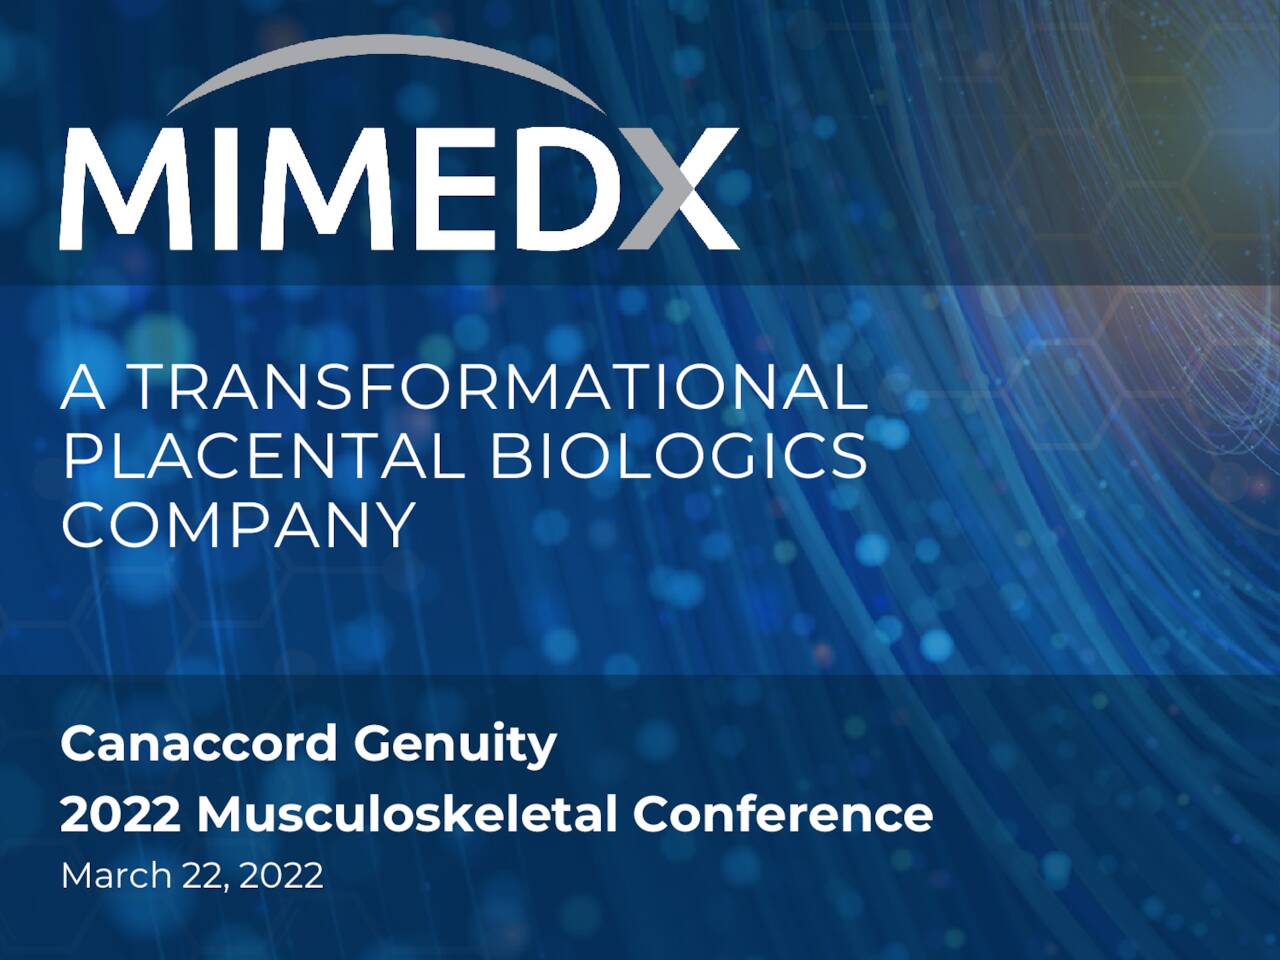 MiMedx Group (MDXG) Presents at the Canaccord Genuity Musculoskeletal